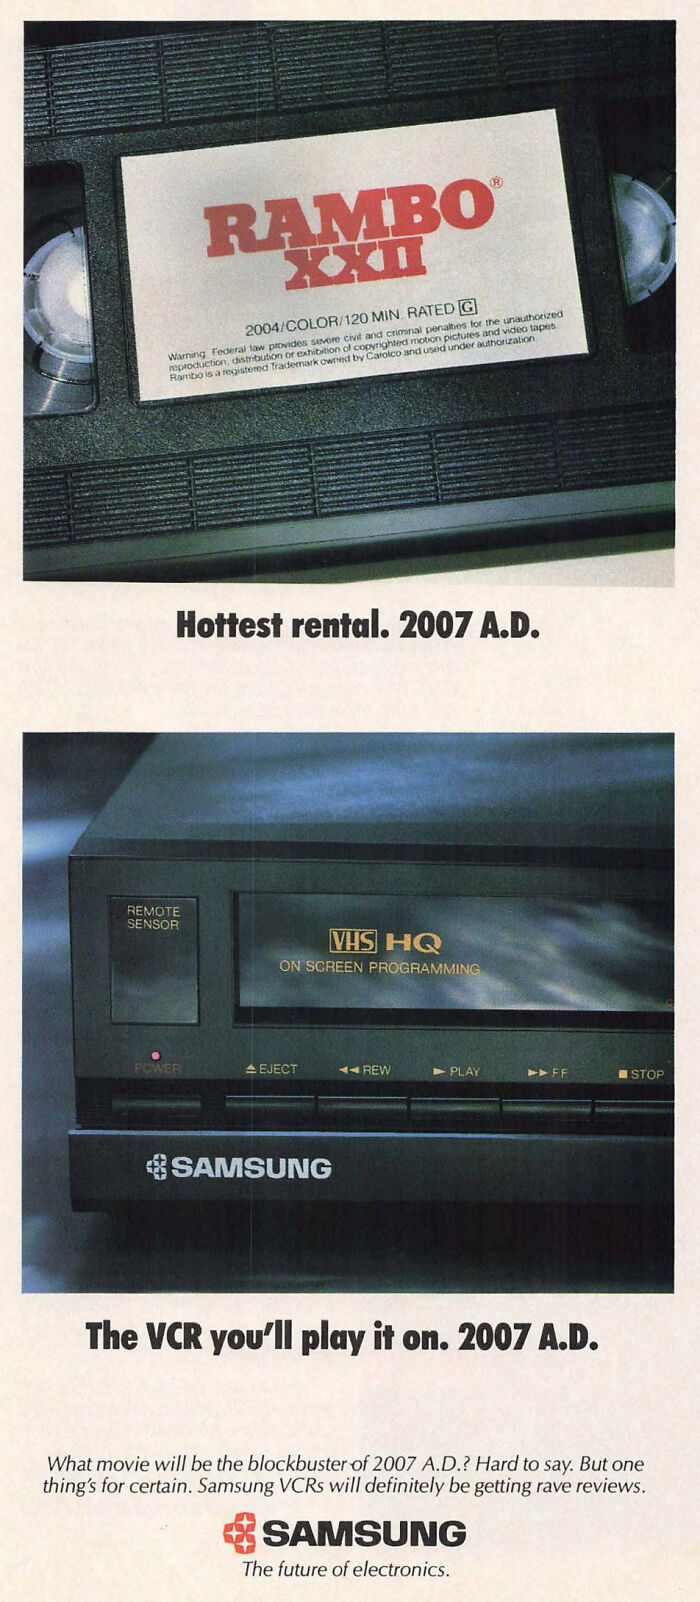 Samsung Ad From 1989 Predicting The Best Vcr To Play The Most Popular Movies Of 2007